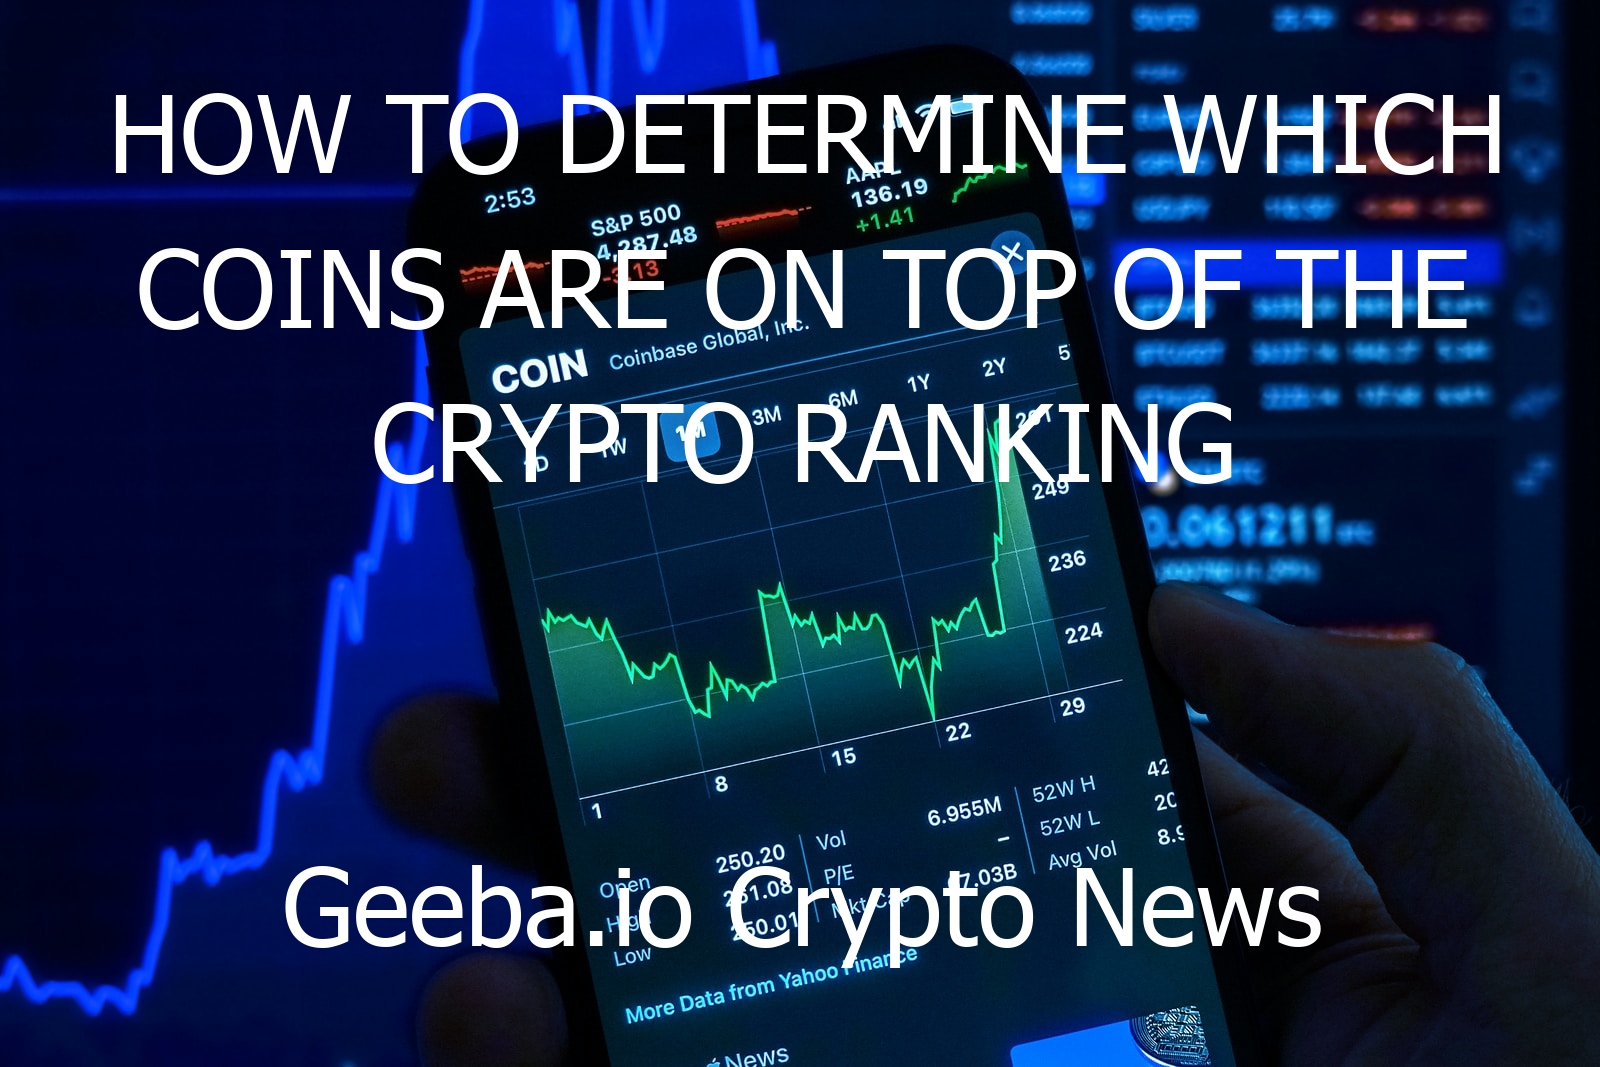 how to determine which coins are on top of the crypto ranking 4481